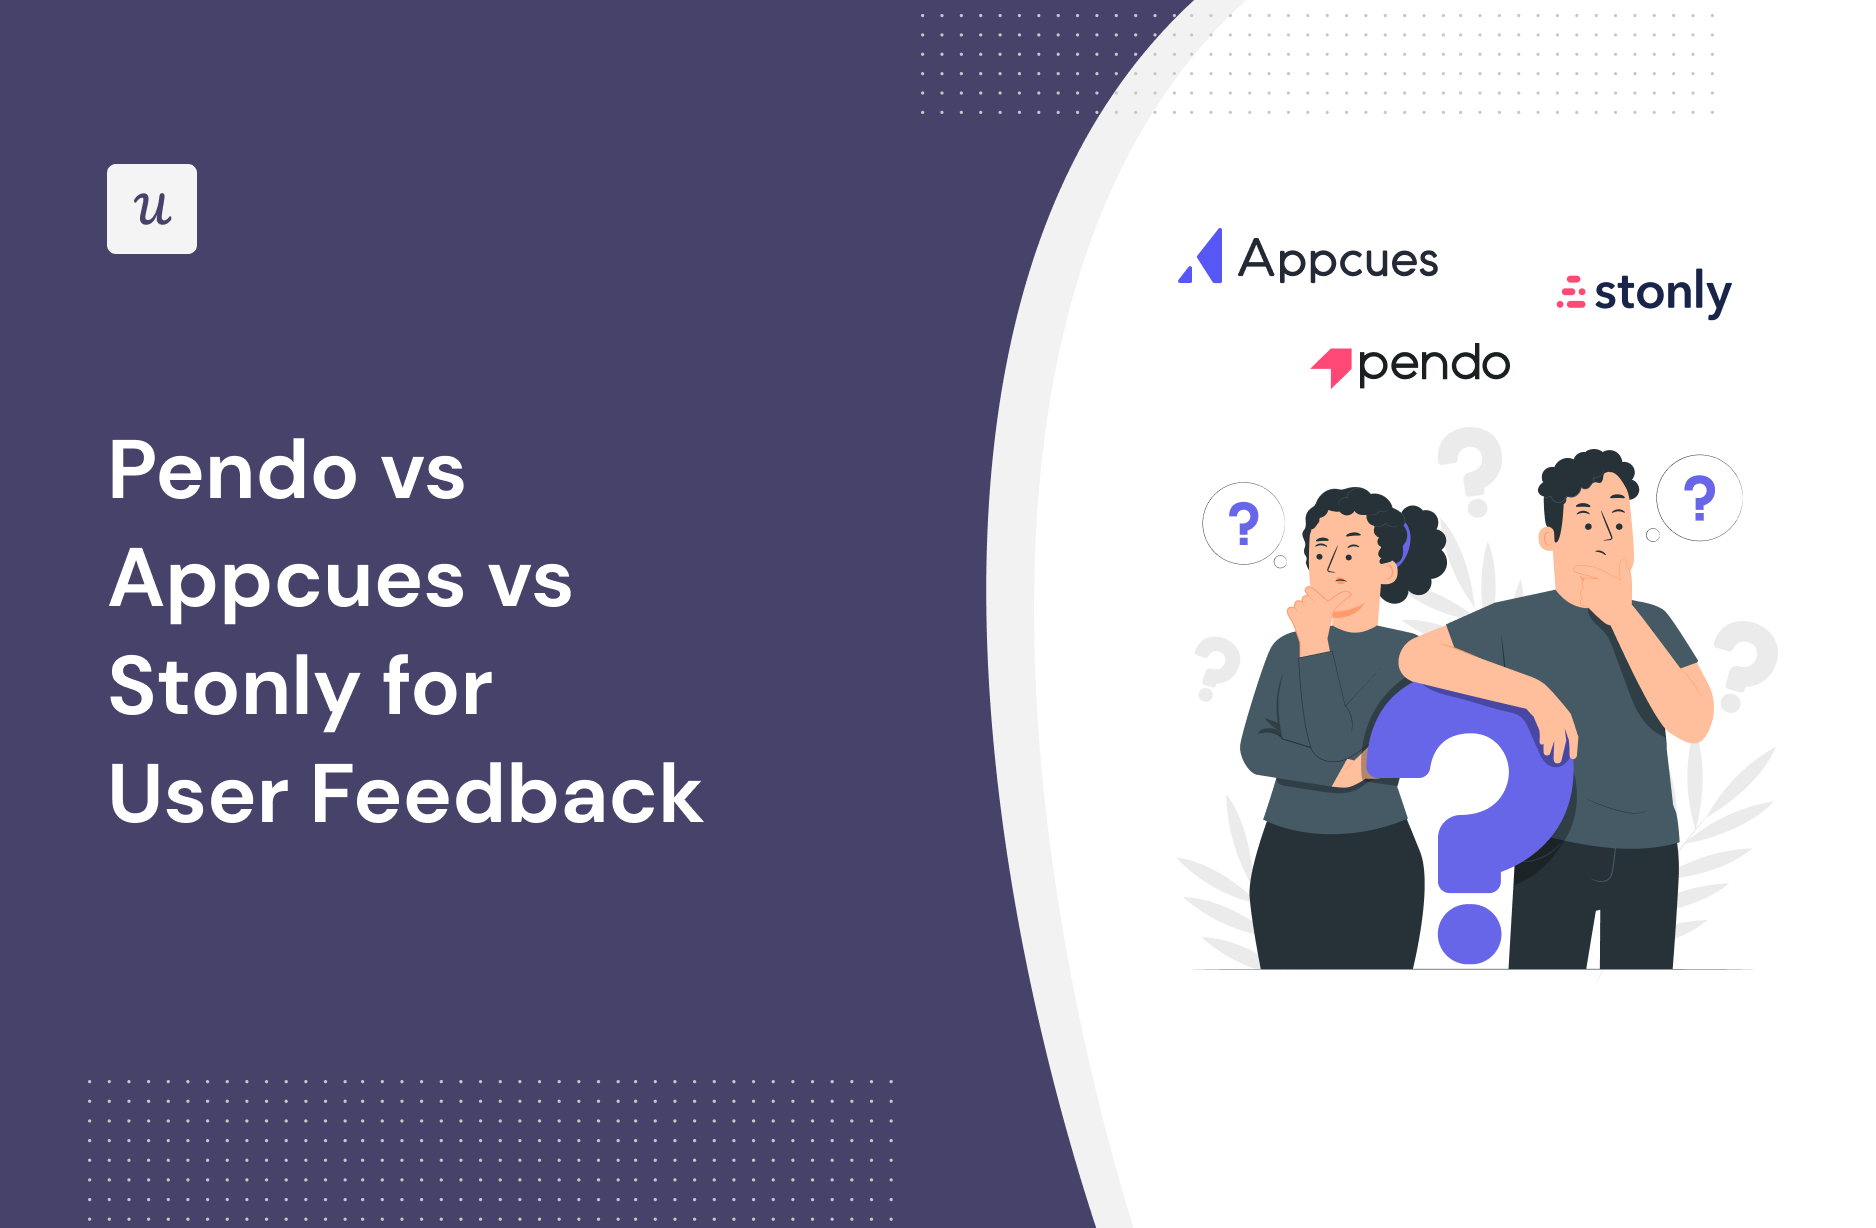 Pendo vs Appcues vs Stonly for User Feedback